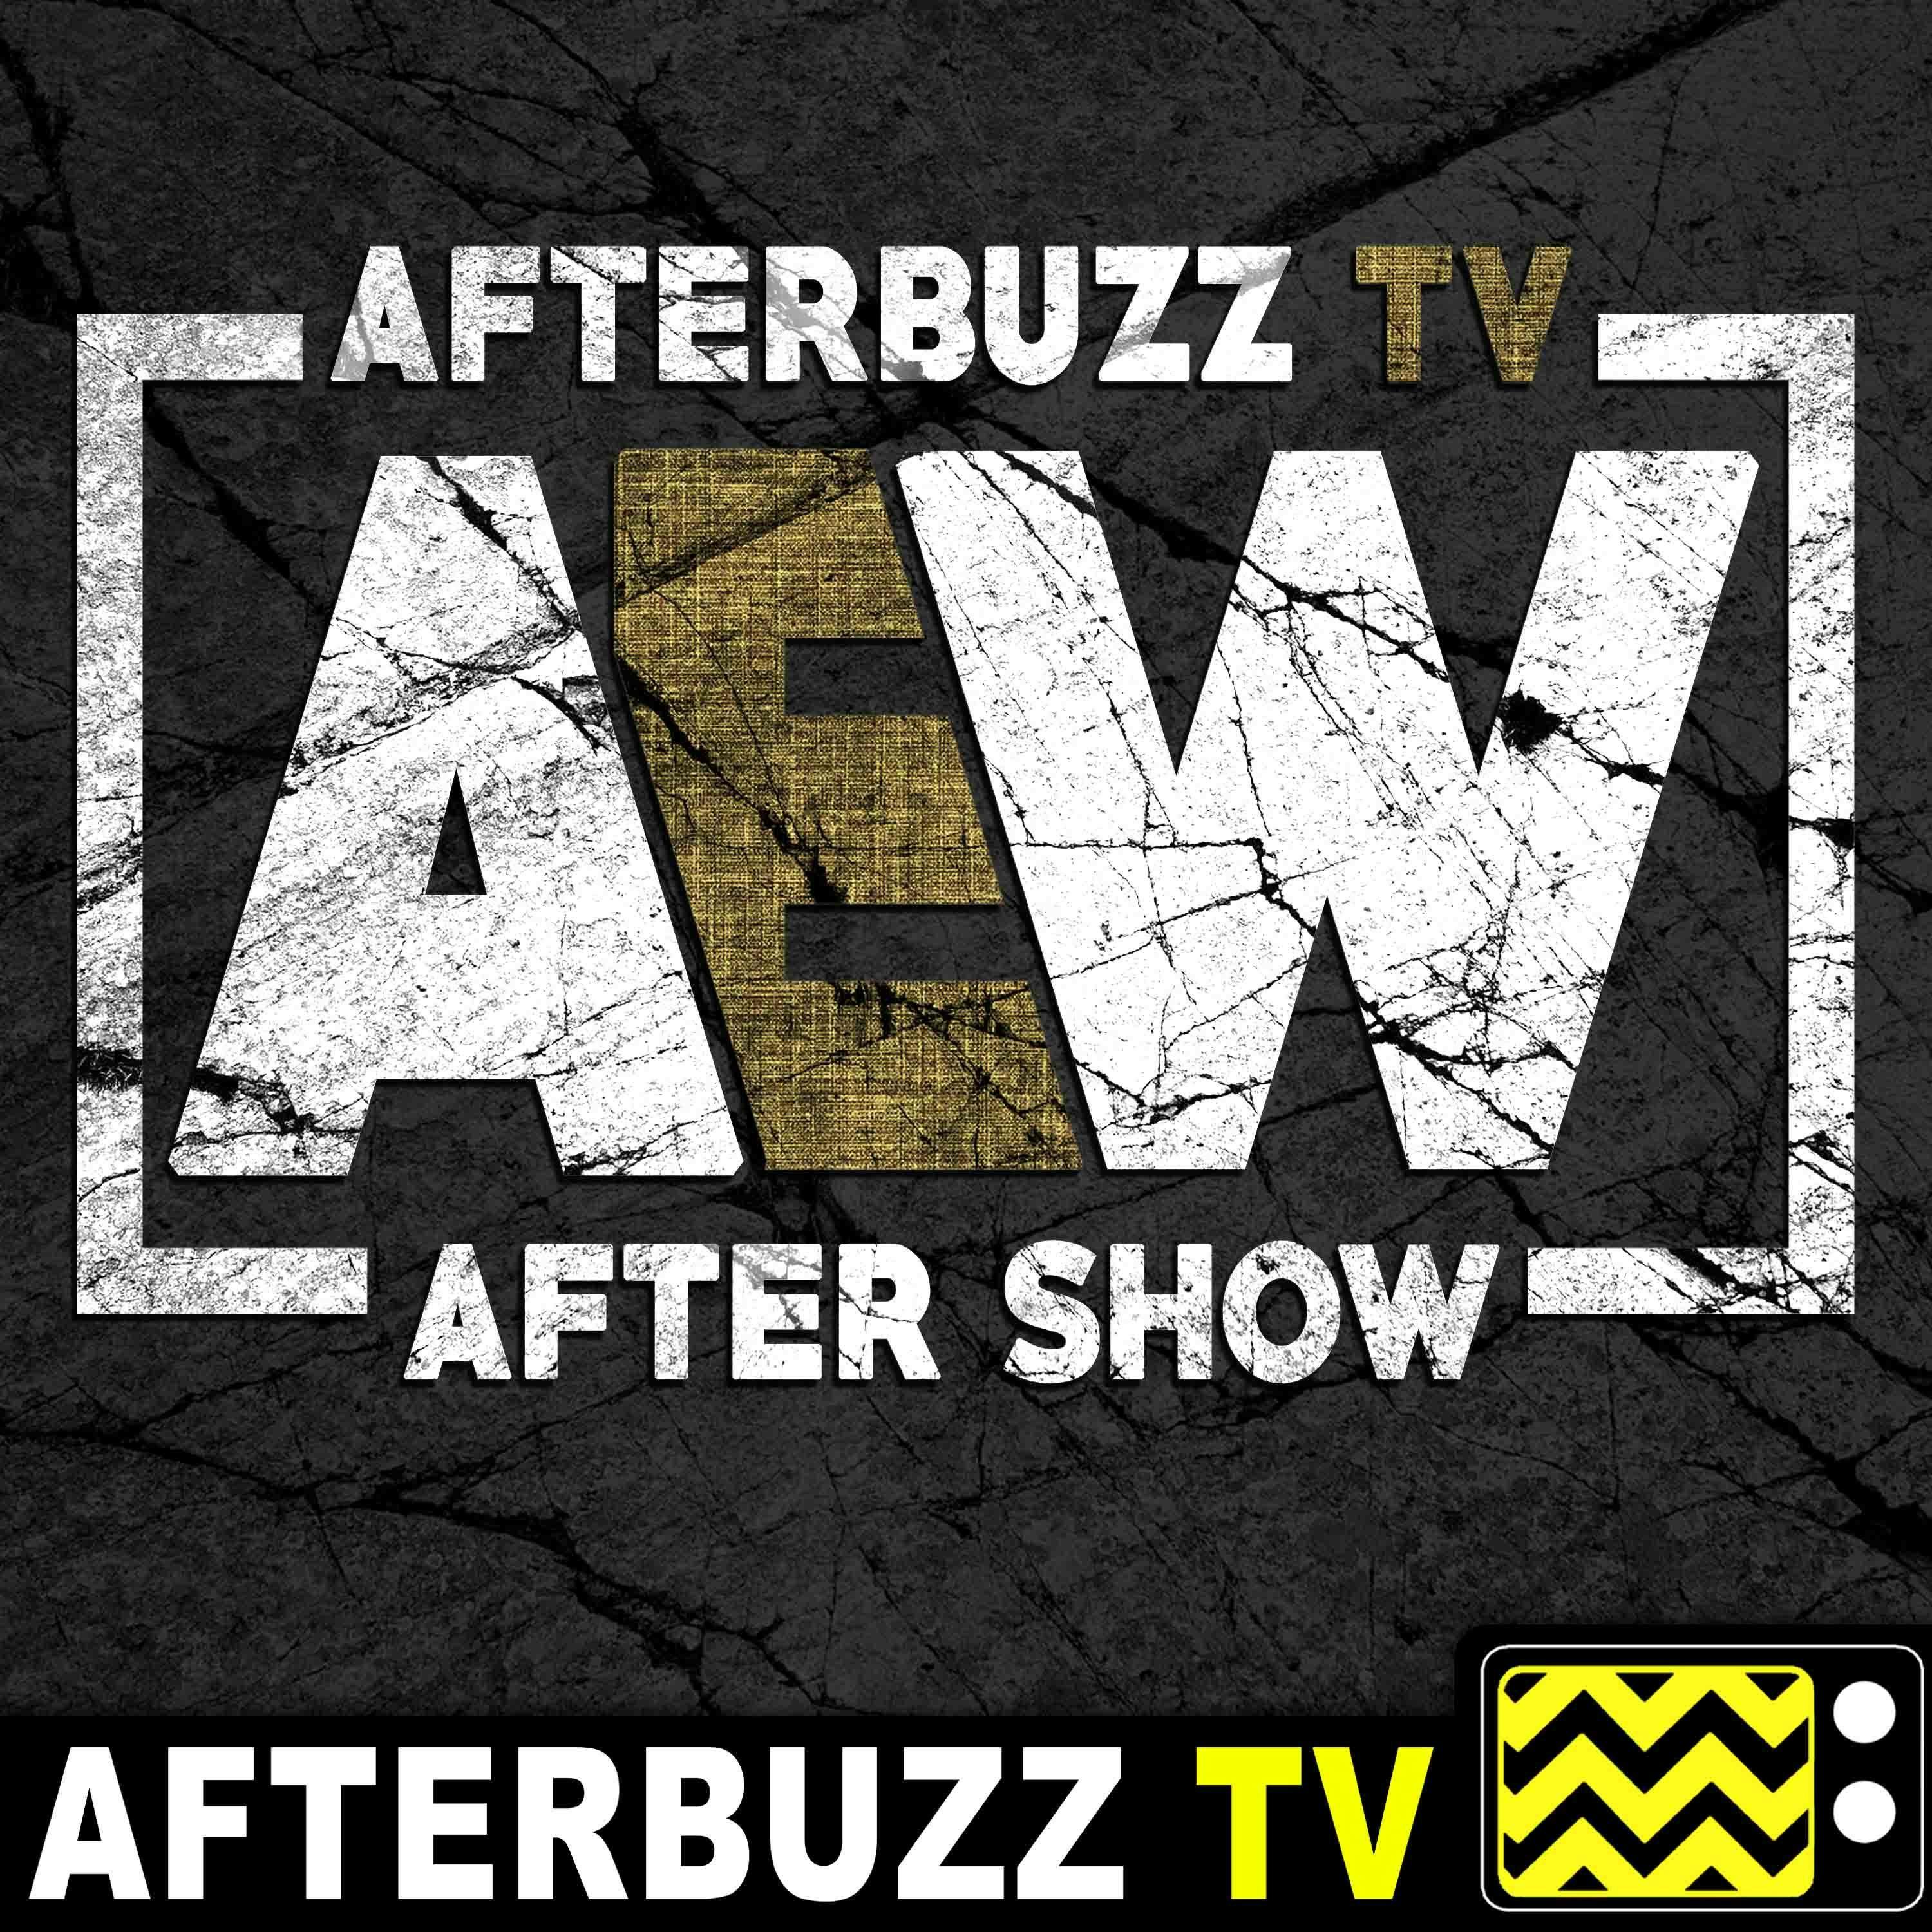 Stadium Stampede Caps Off An Elite Show At AEW Double Or Nothing 2 - All Elite Wrestling Recap & After Show May 24th, 2020